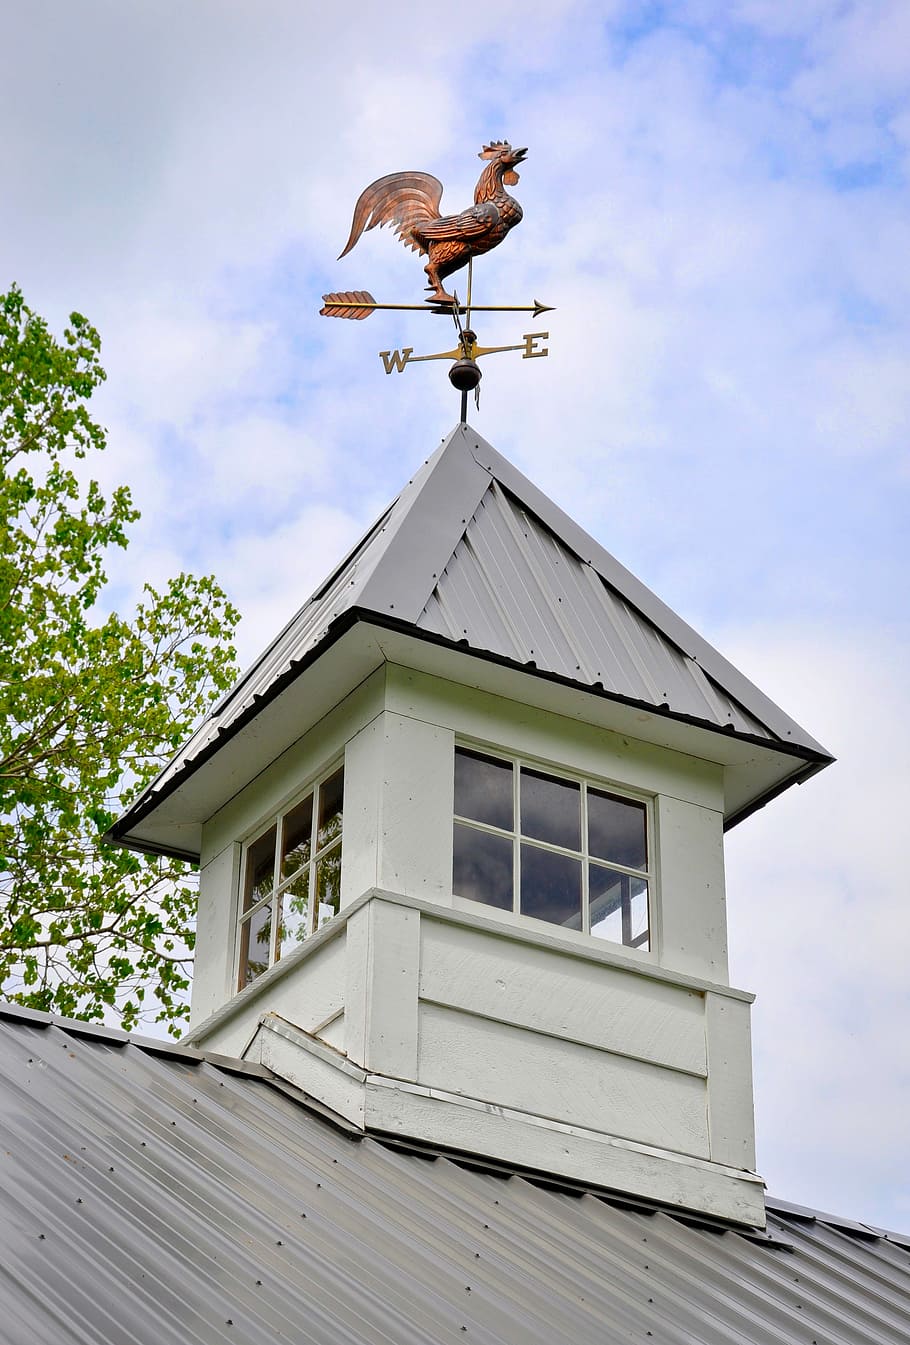 Weather Vane, Antique, Cupola, Farm, barn, rooster, cooper